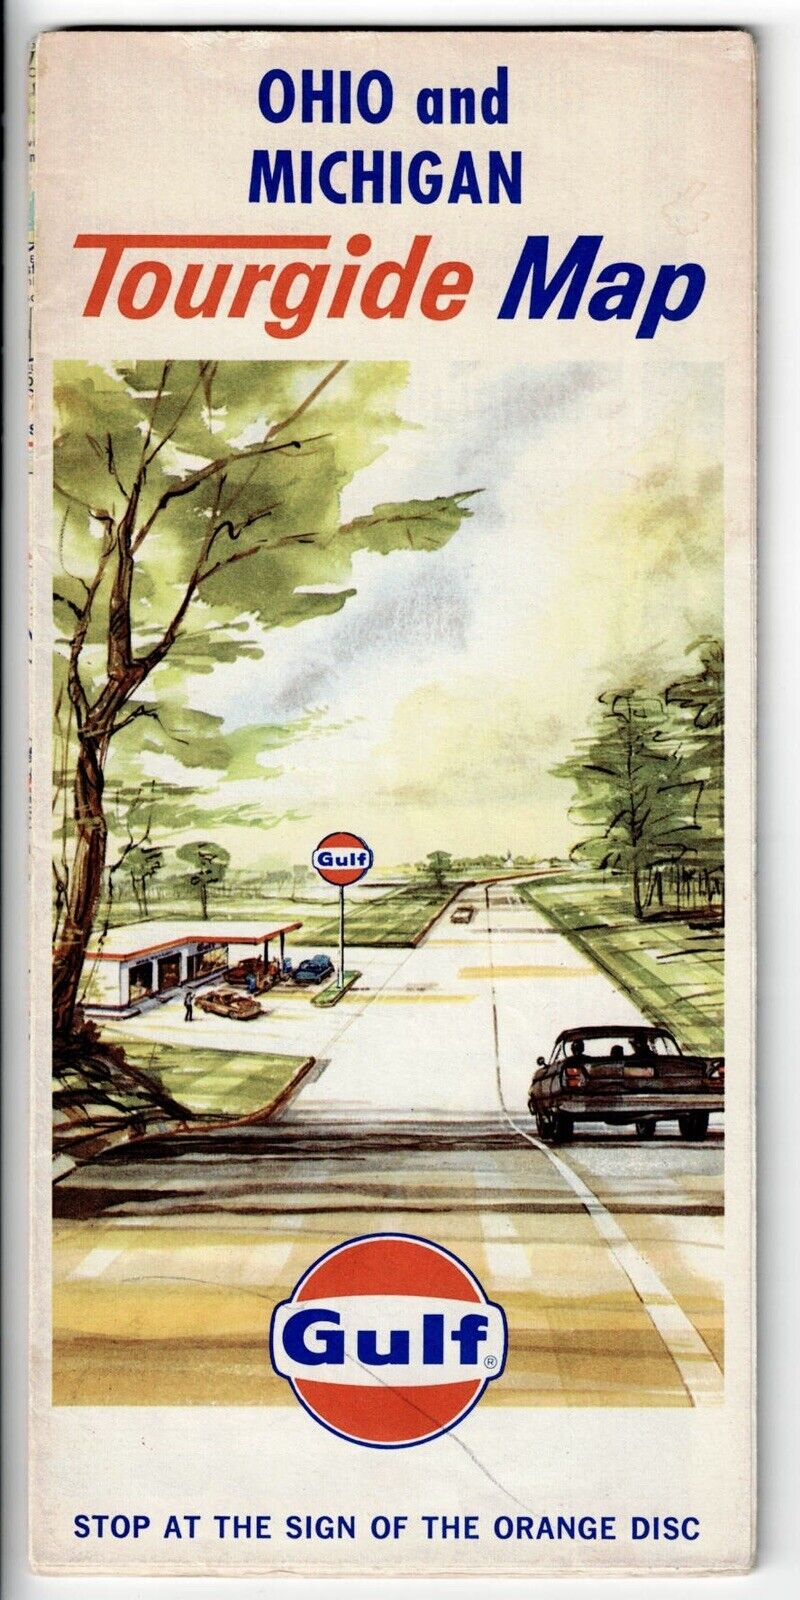 Vintage 1964 - Ohio and Michigan Tourguide Map - Gulf Gas & Oil